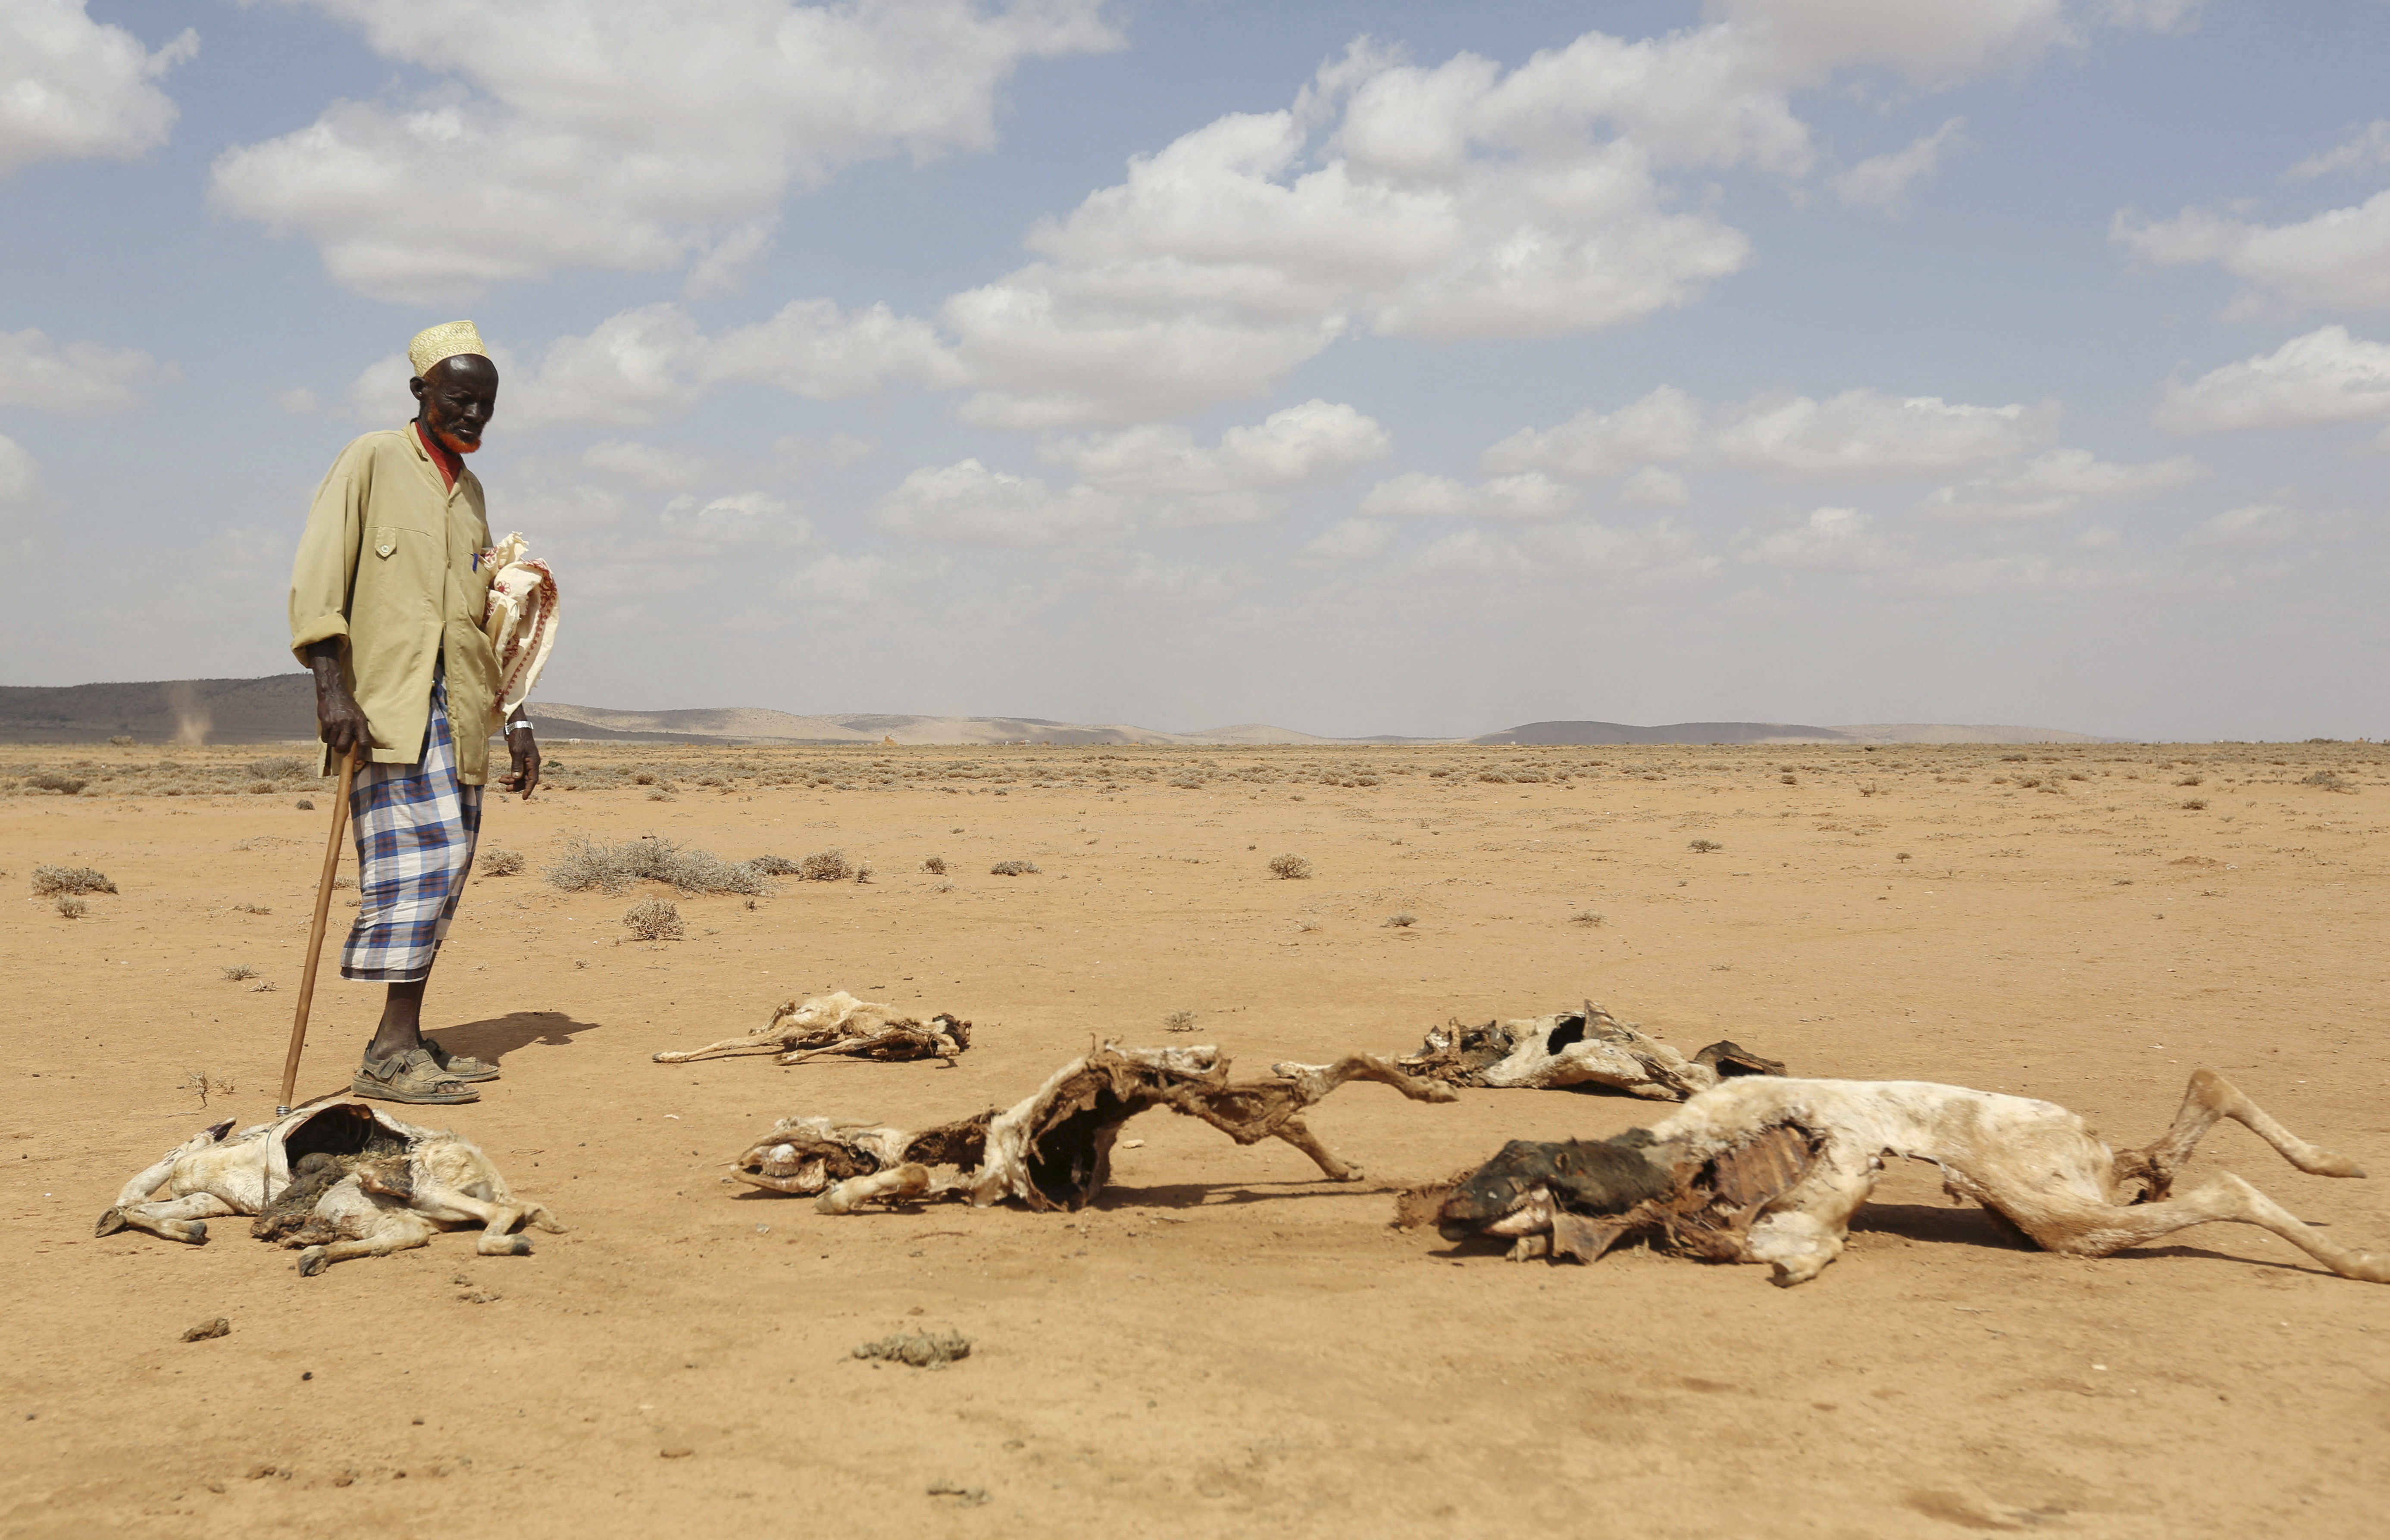 A man looks at the carcasses of animals that died due to the El Nino-related drought in Marodijeex town of southern Hargeysa, in northern Somalia's semi-autonomous Somaliland region